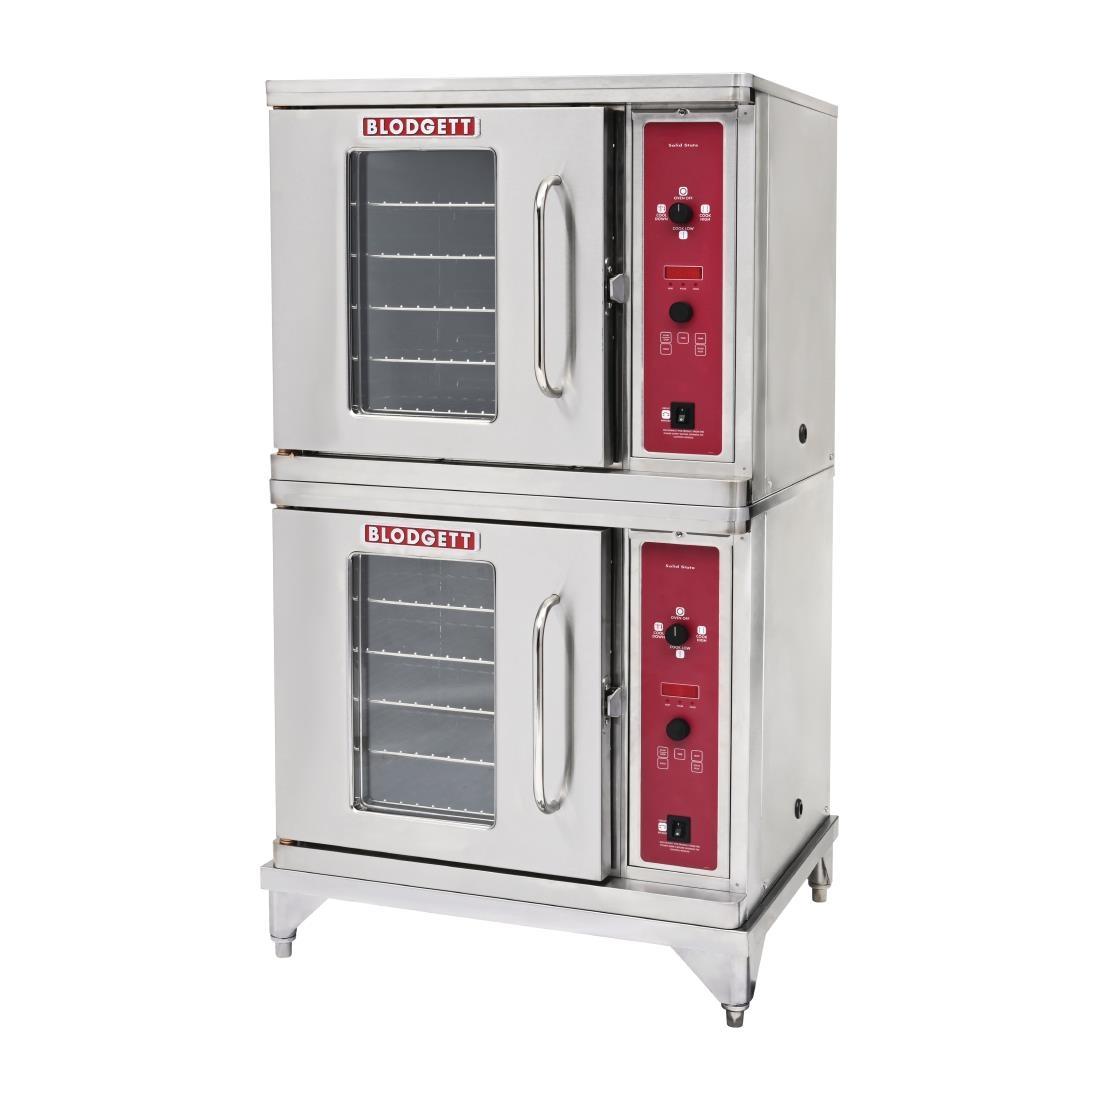 Blodgett Half Size Double Stacked Convection Oven CTB-2 - FP875  - 5